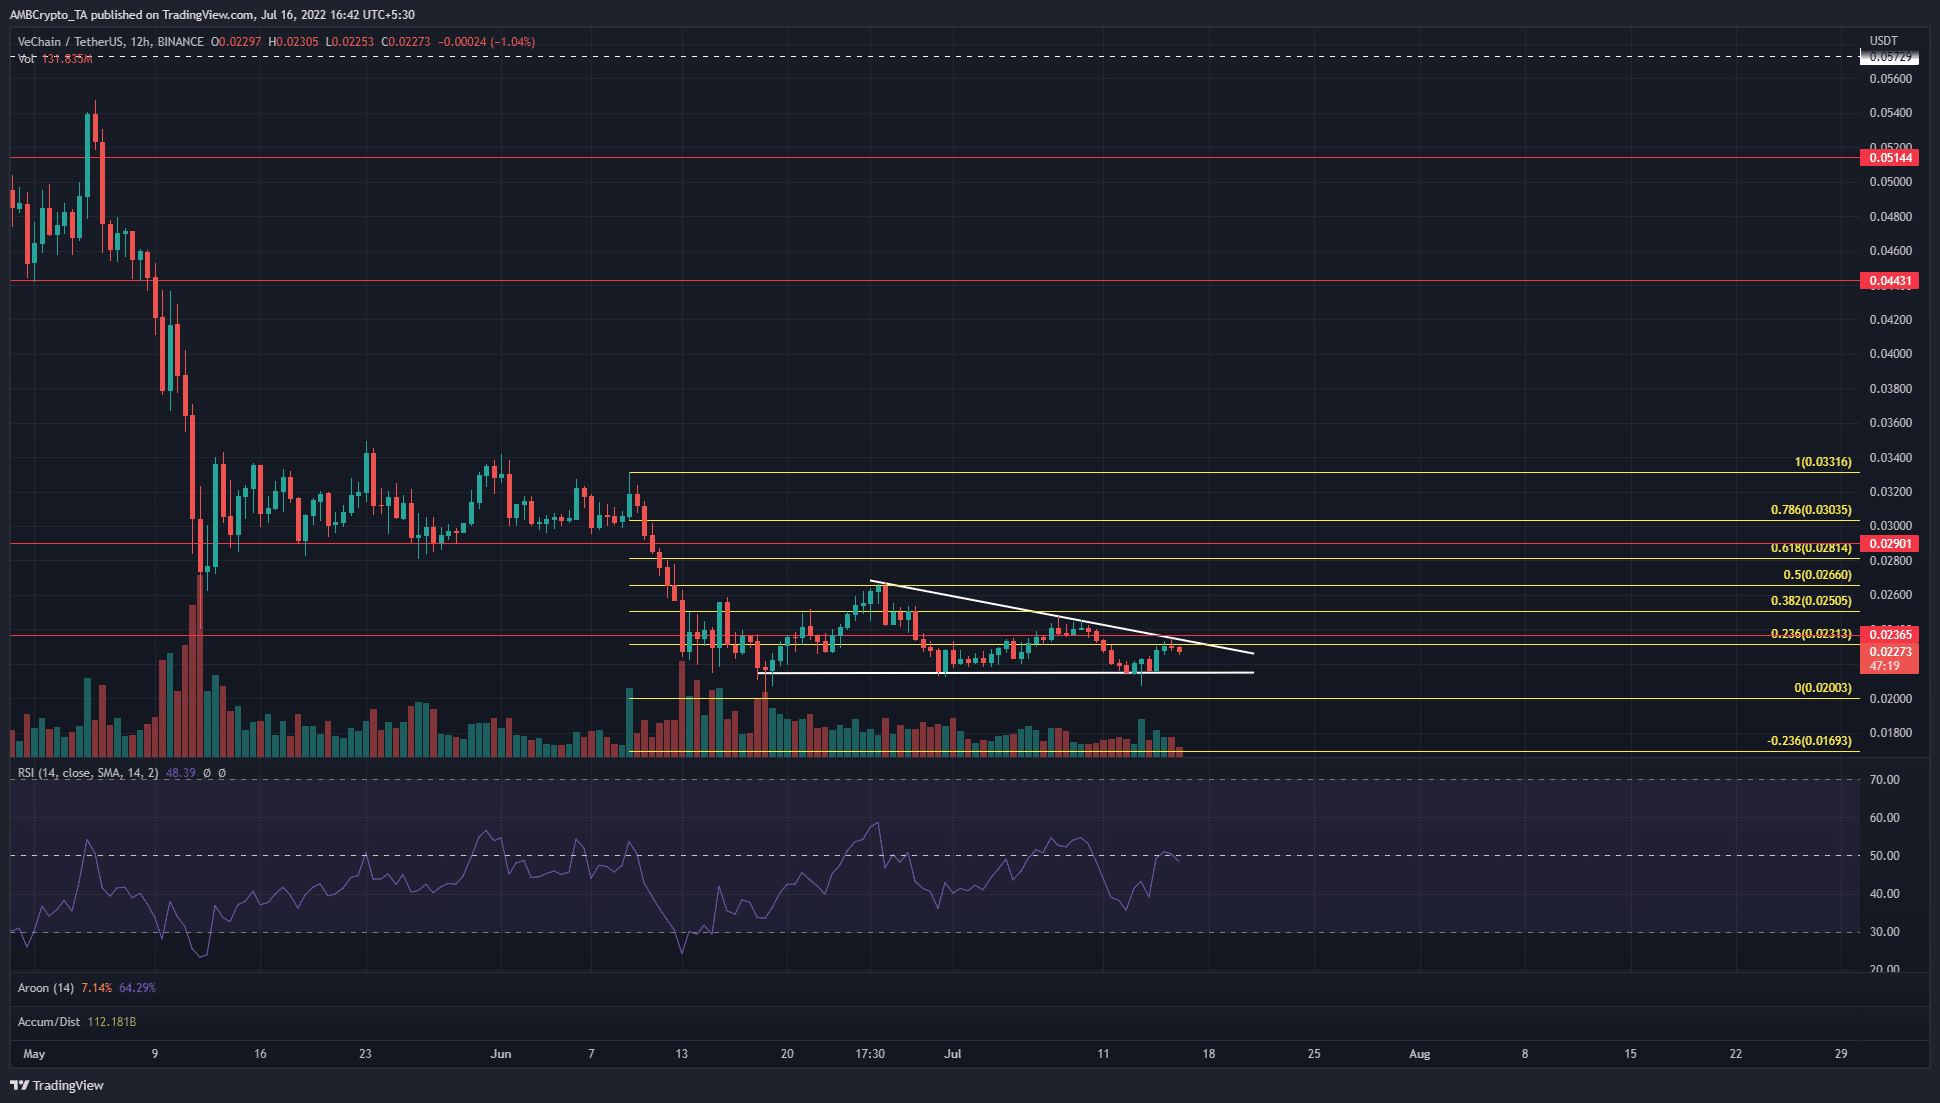 VeChain threatens a break down with bearish pattern, here are the levels to watch out for